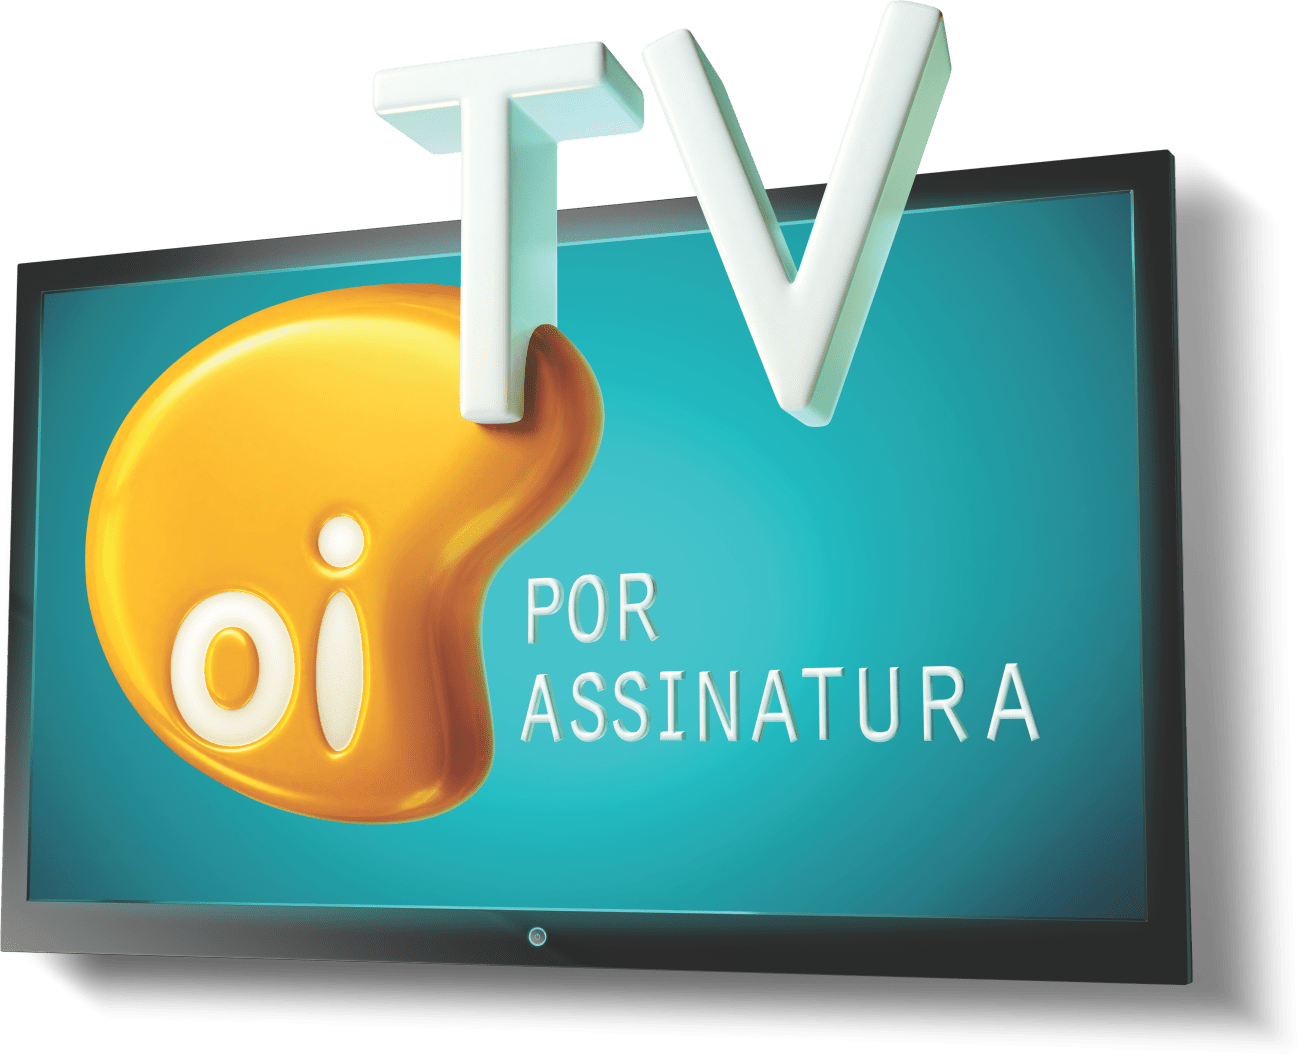 Oi Tv Logo Png - Tv Diario Na Oi Tv (1304x1058), Png Download